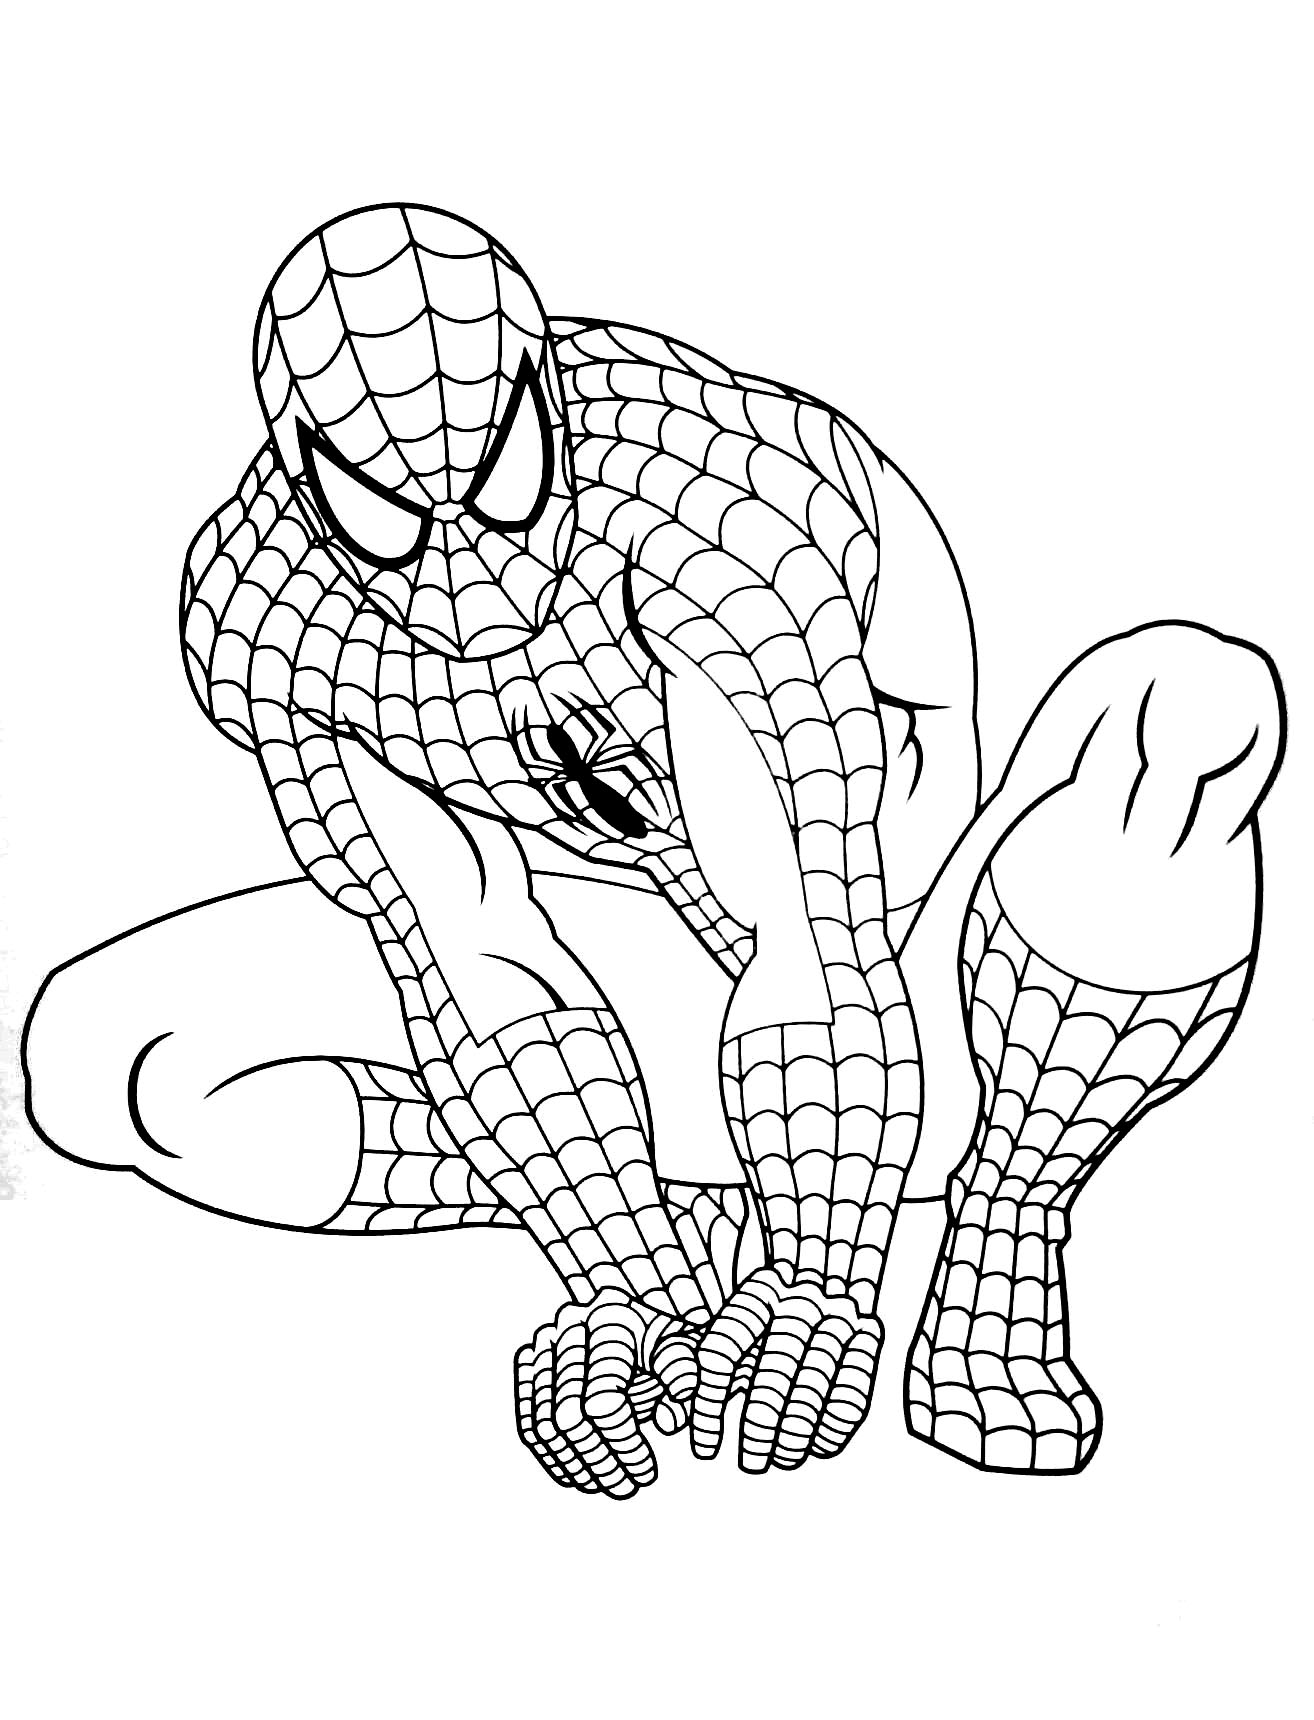 Download Spiderman to print for free - Spiderman Kids Coloring Pages